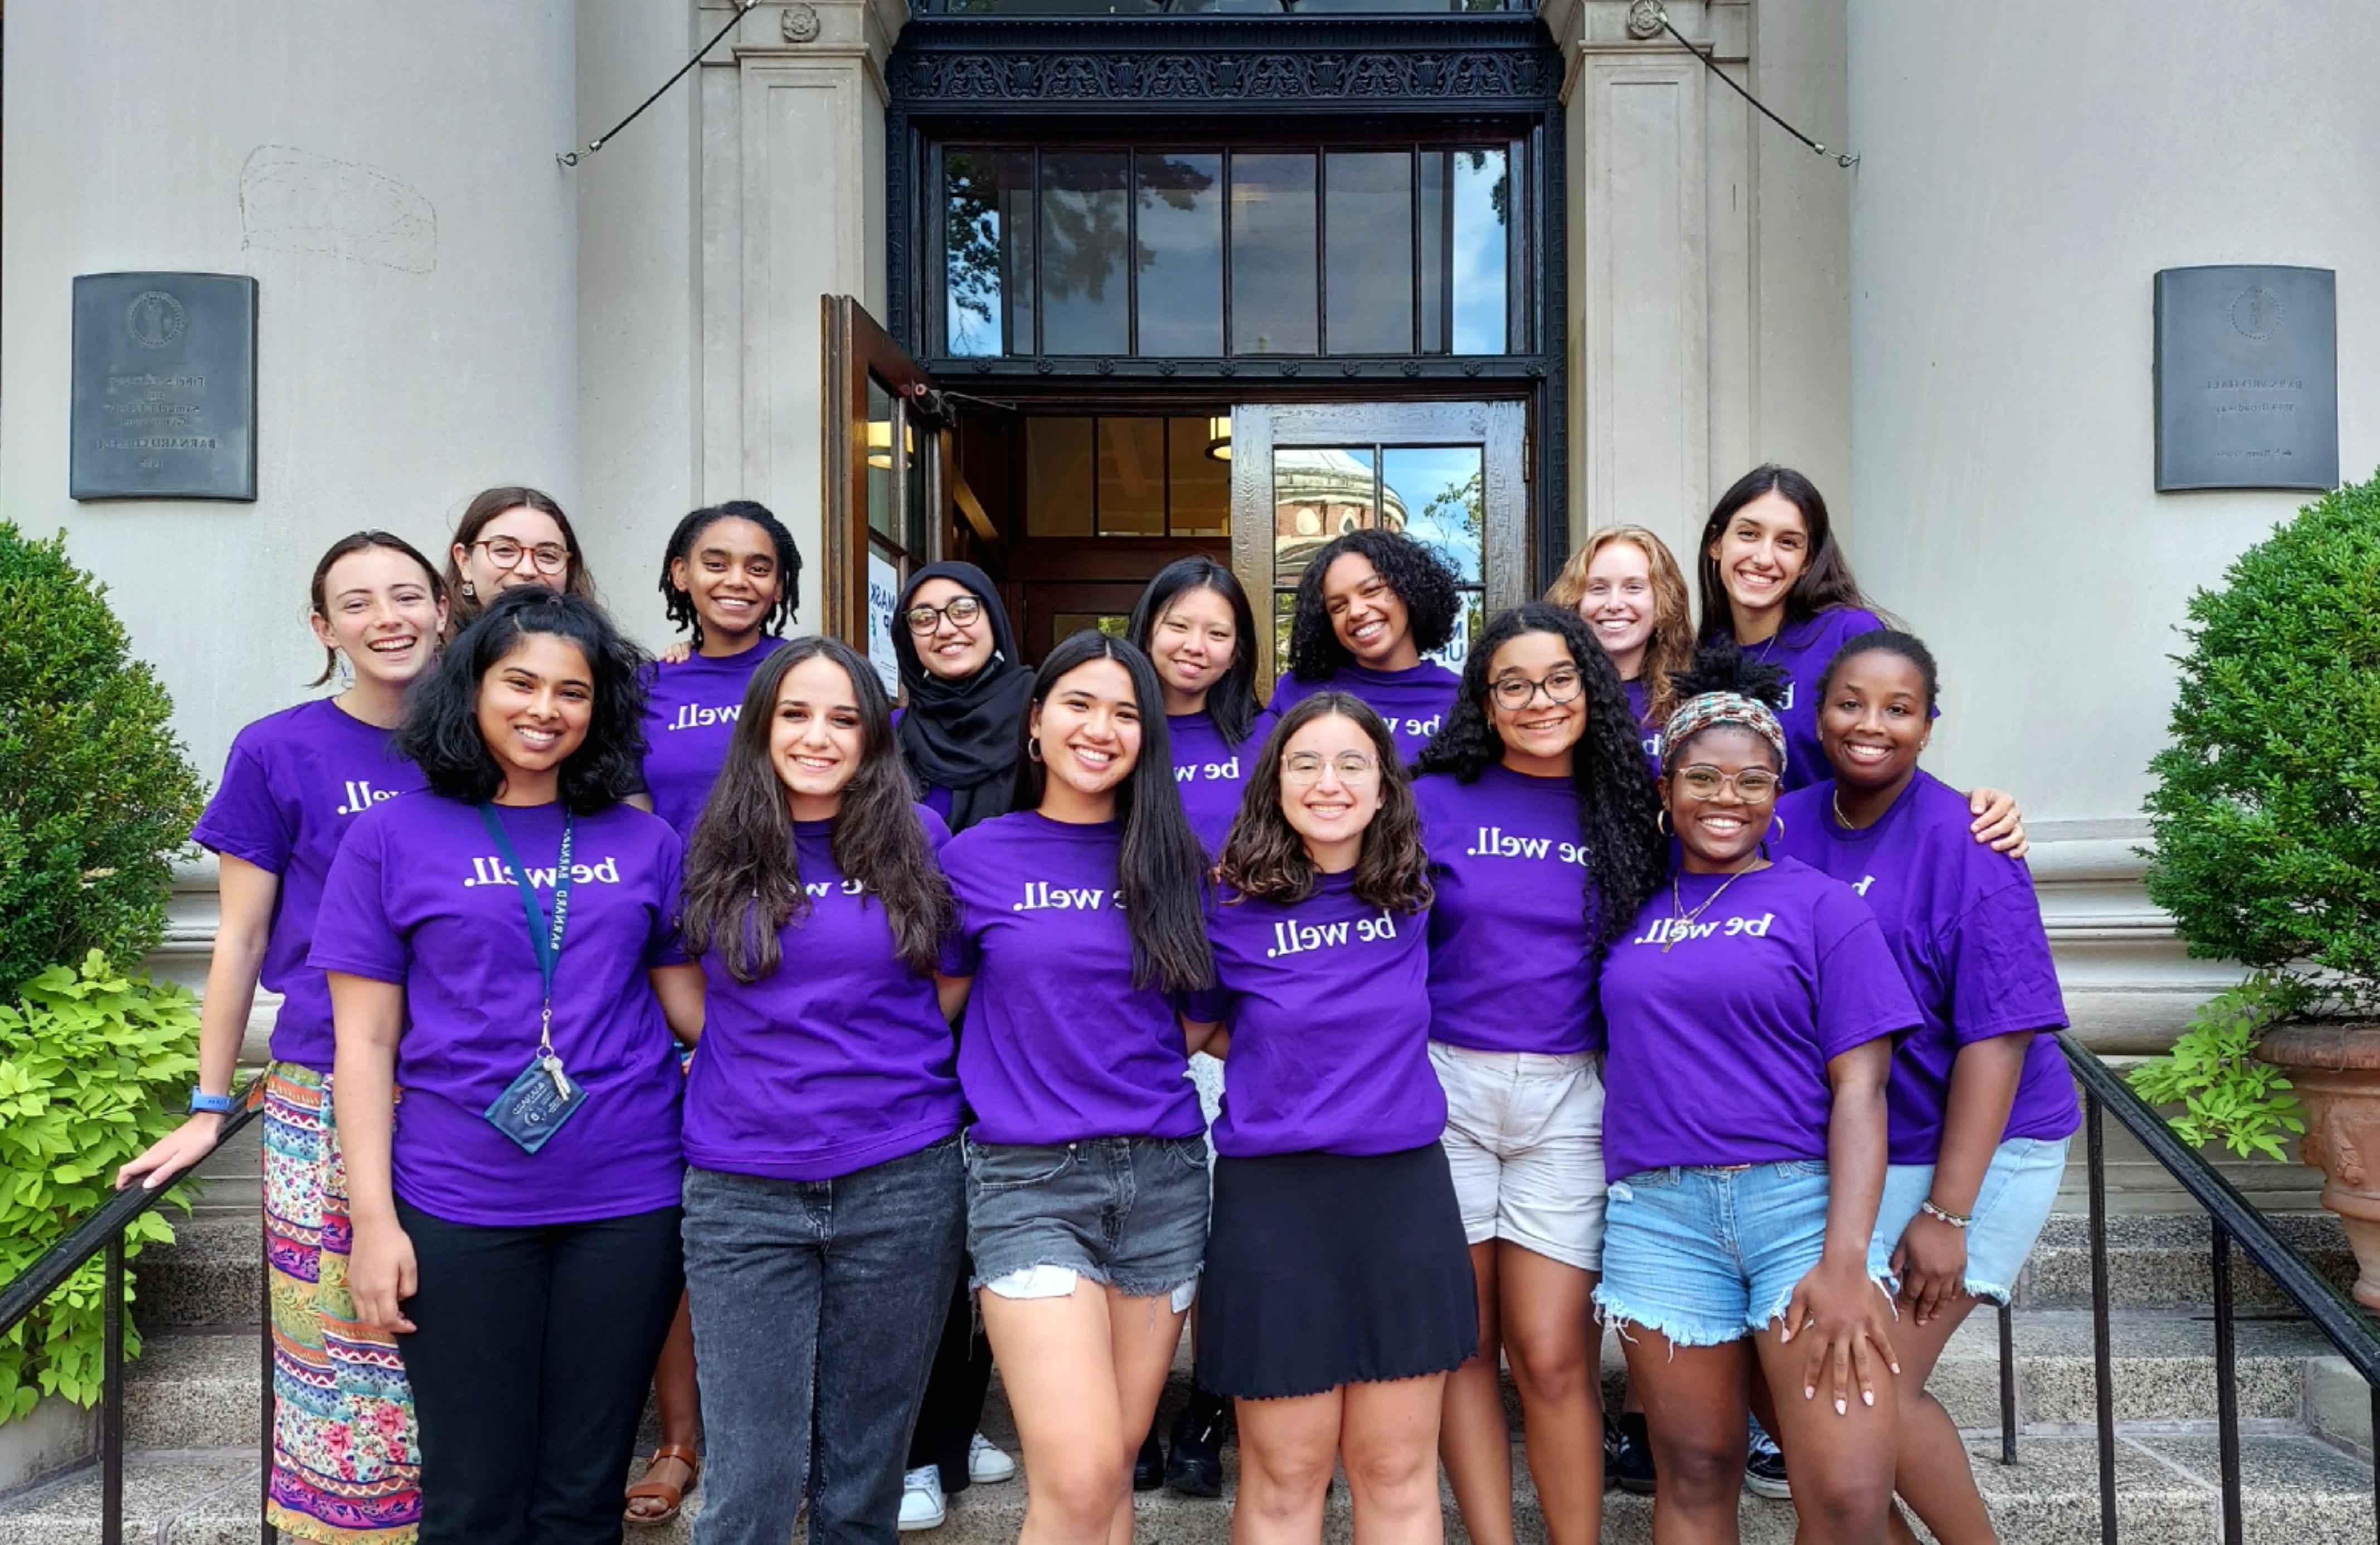 The Wellness Spot peer educators stand on the steps of Barnard Hall wearing purple t-shirts that say "be well" in white letters.